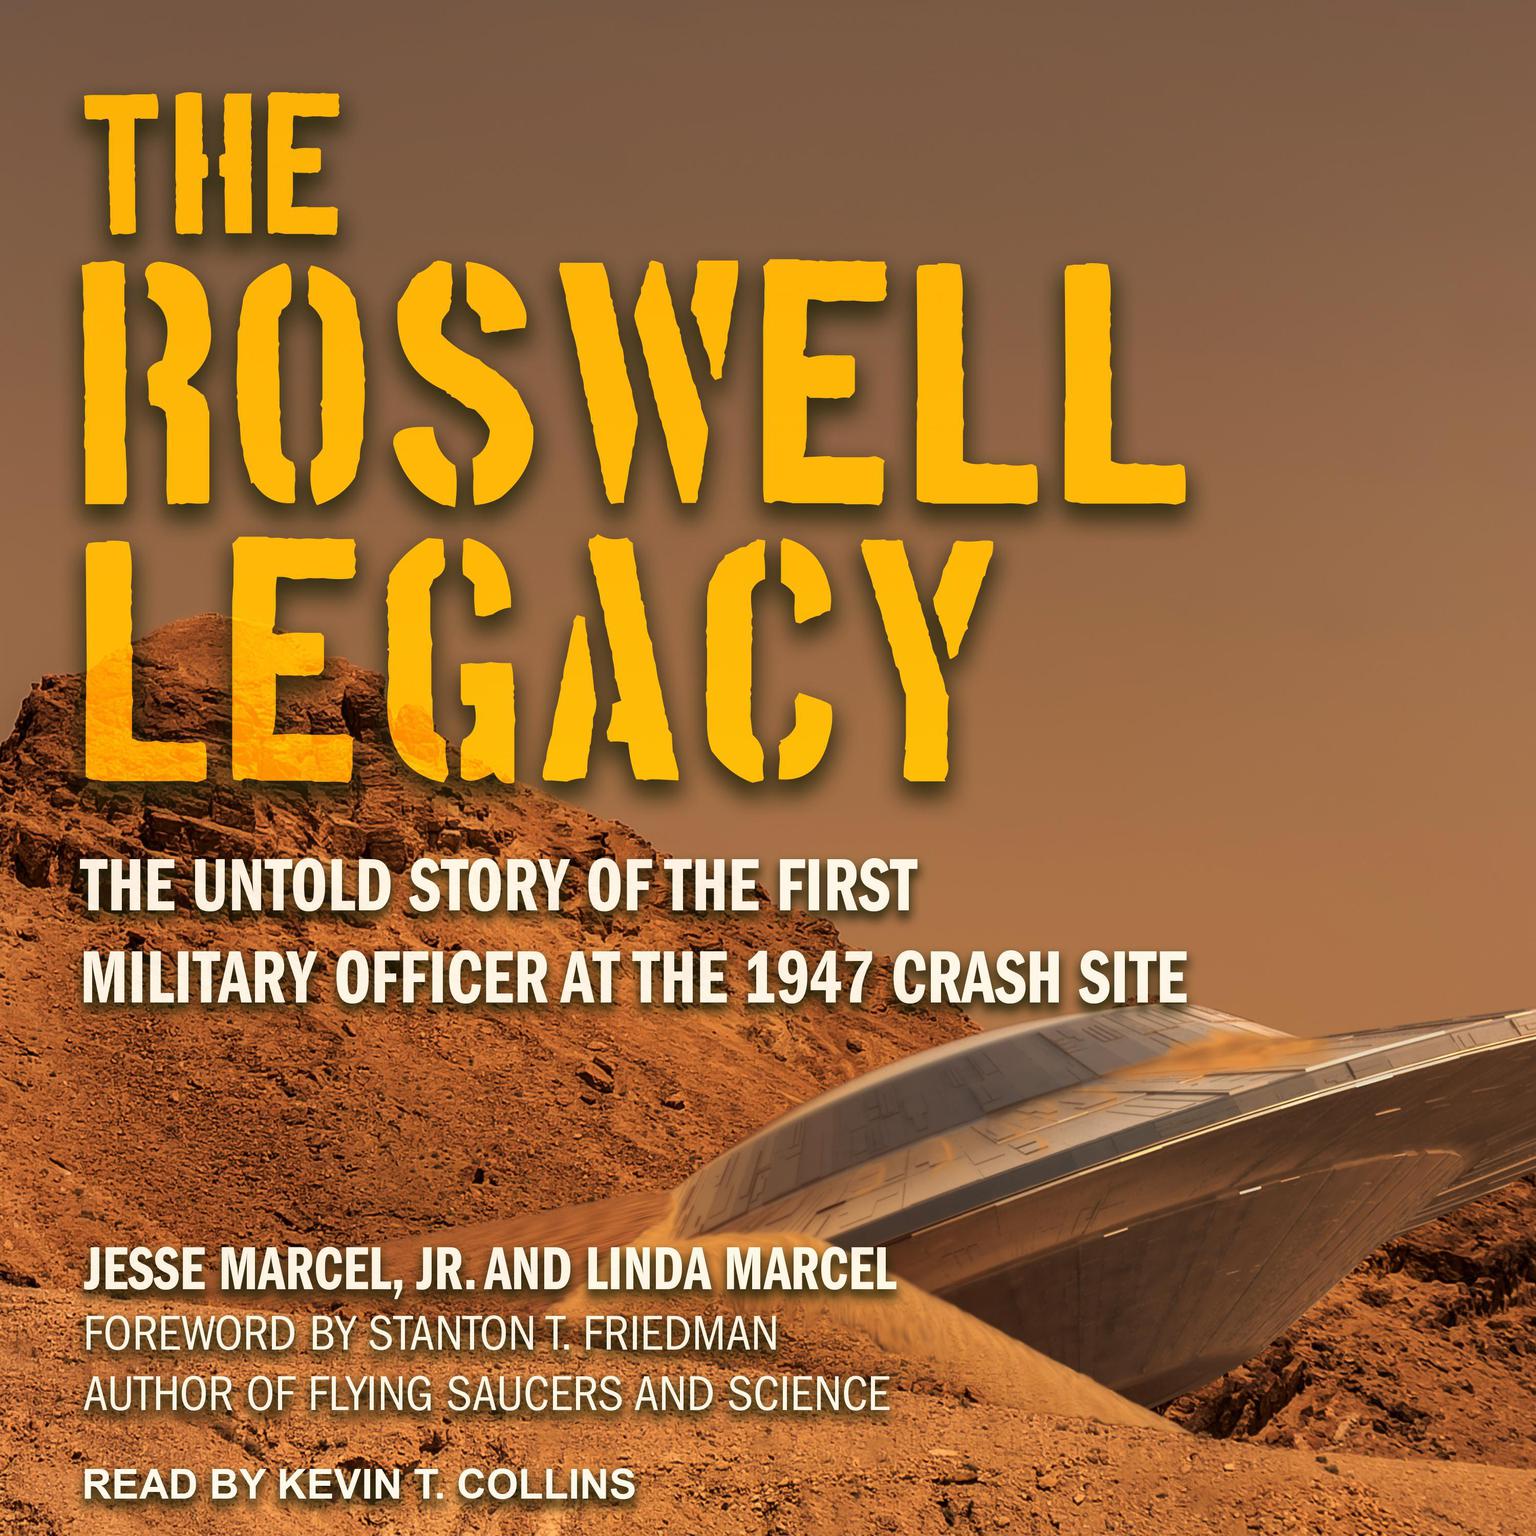 The Roswell Legacy: The Untold Story of the First Military Officer at the 1947 Crash Site Audiobook, by Jesse Marcel